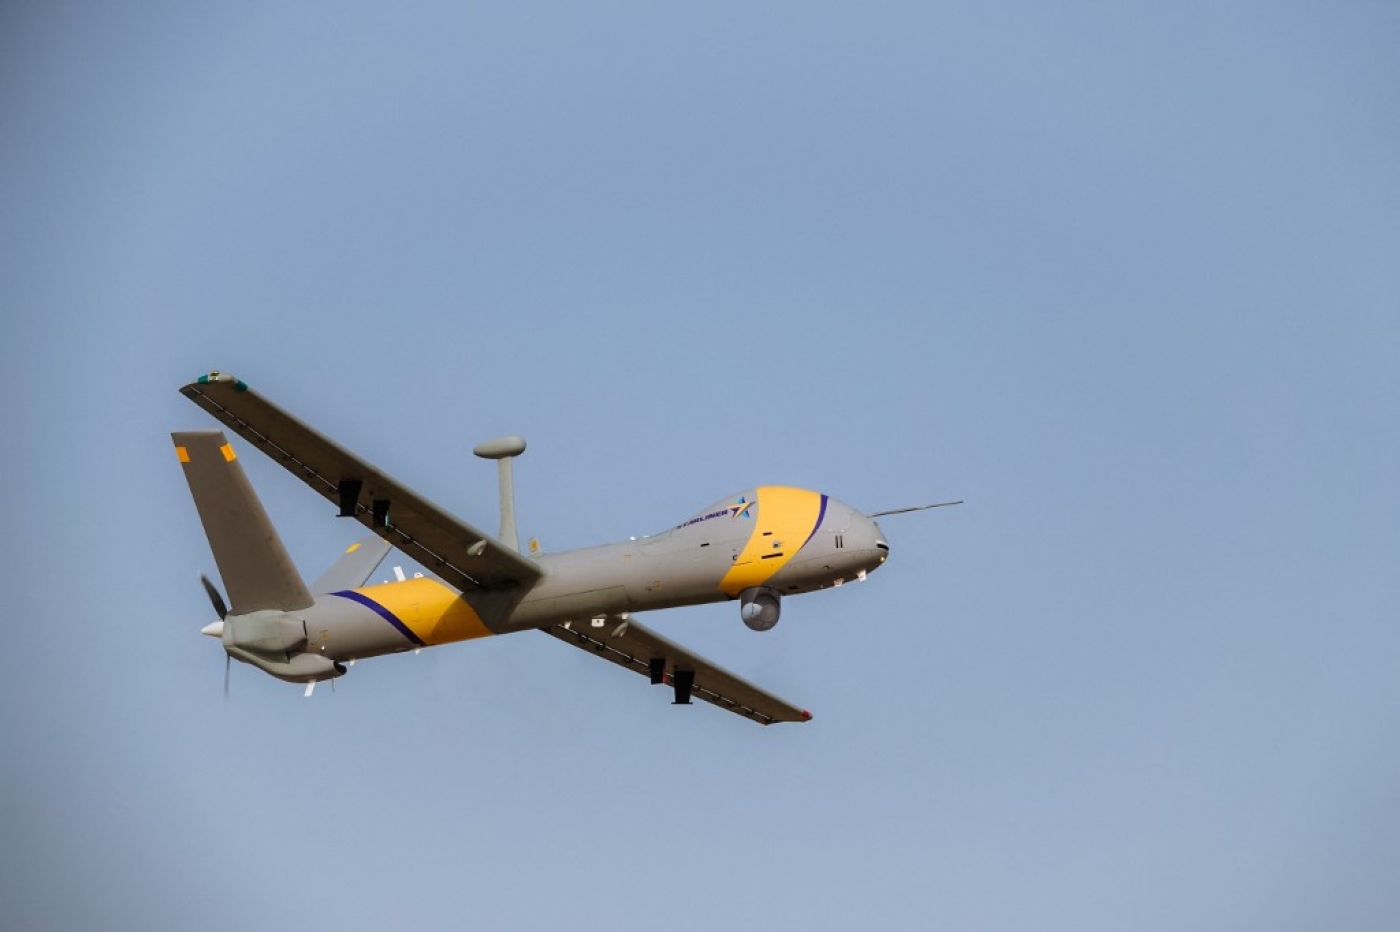 Canada first announced its purchase of the Israeli-made drones last December.